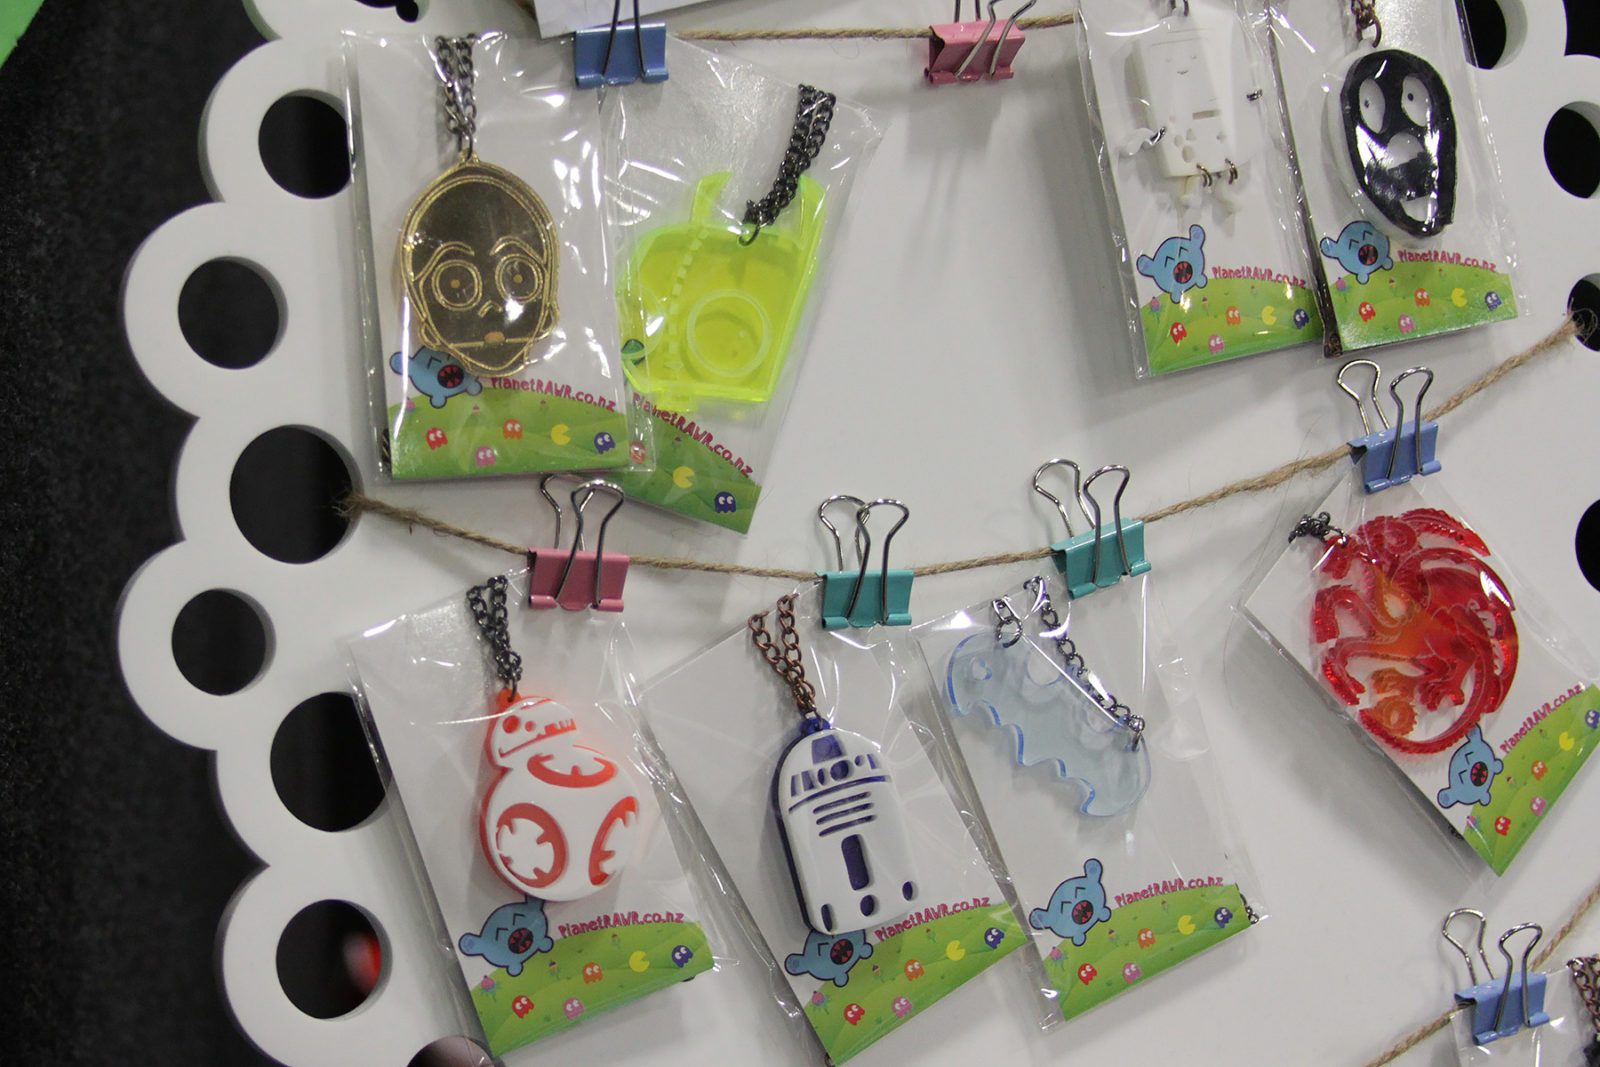 Star Wars Jewelry by Planet RAWR at Armageddon Expo Auckland 2018